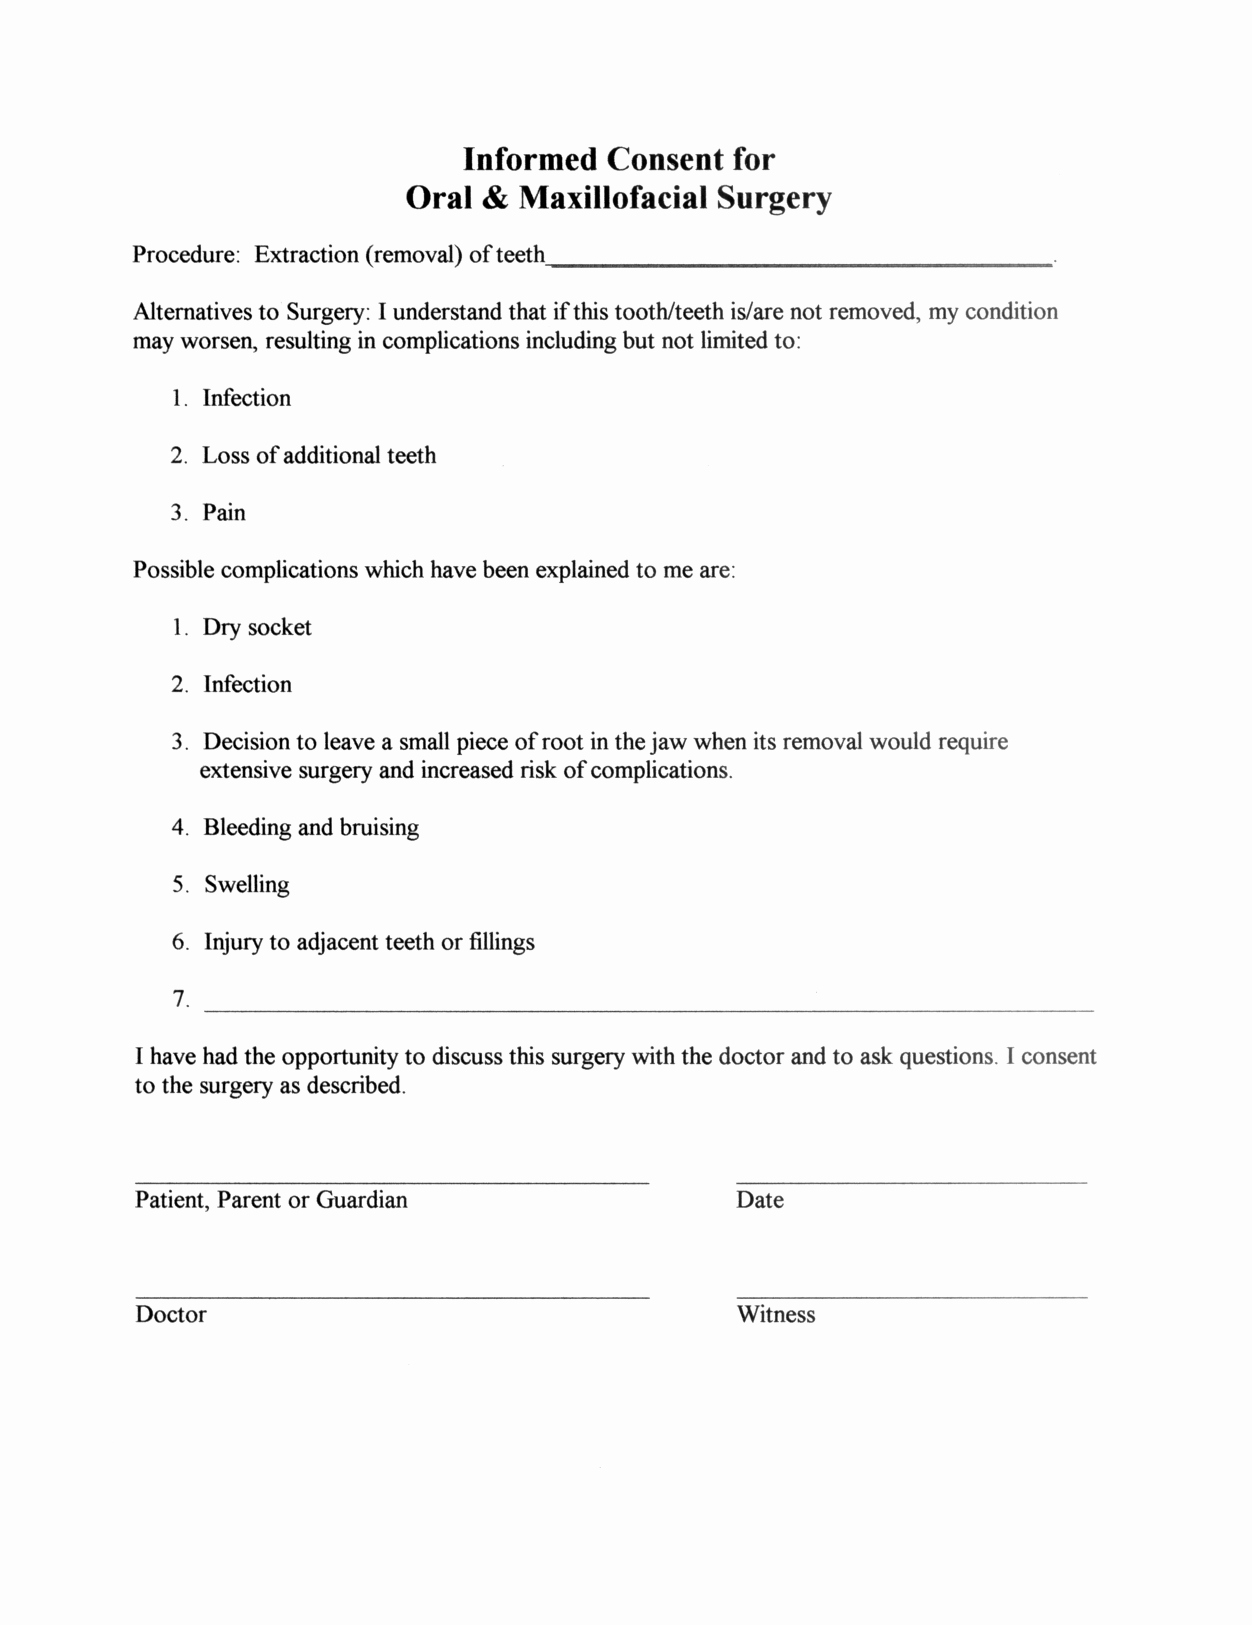 Video Consent form Template Best Of Surgery Informed Consent form Template